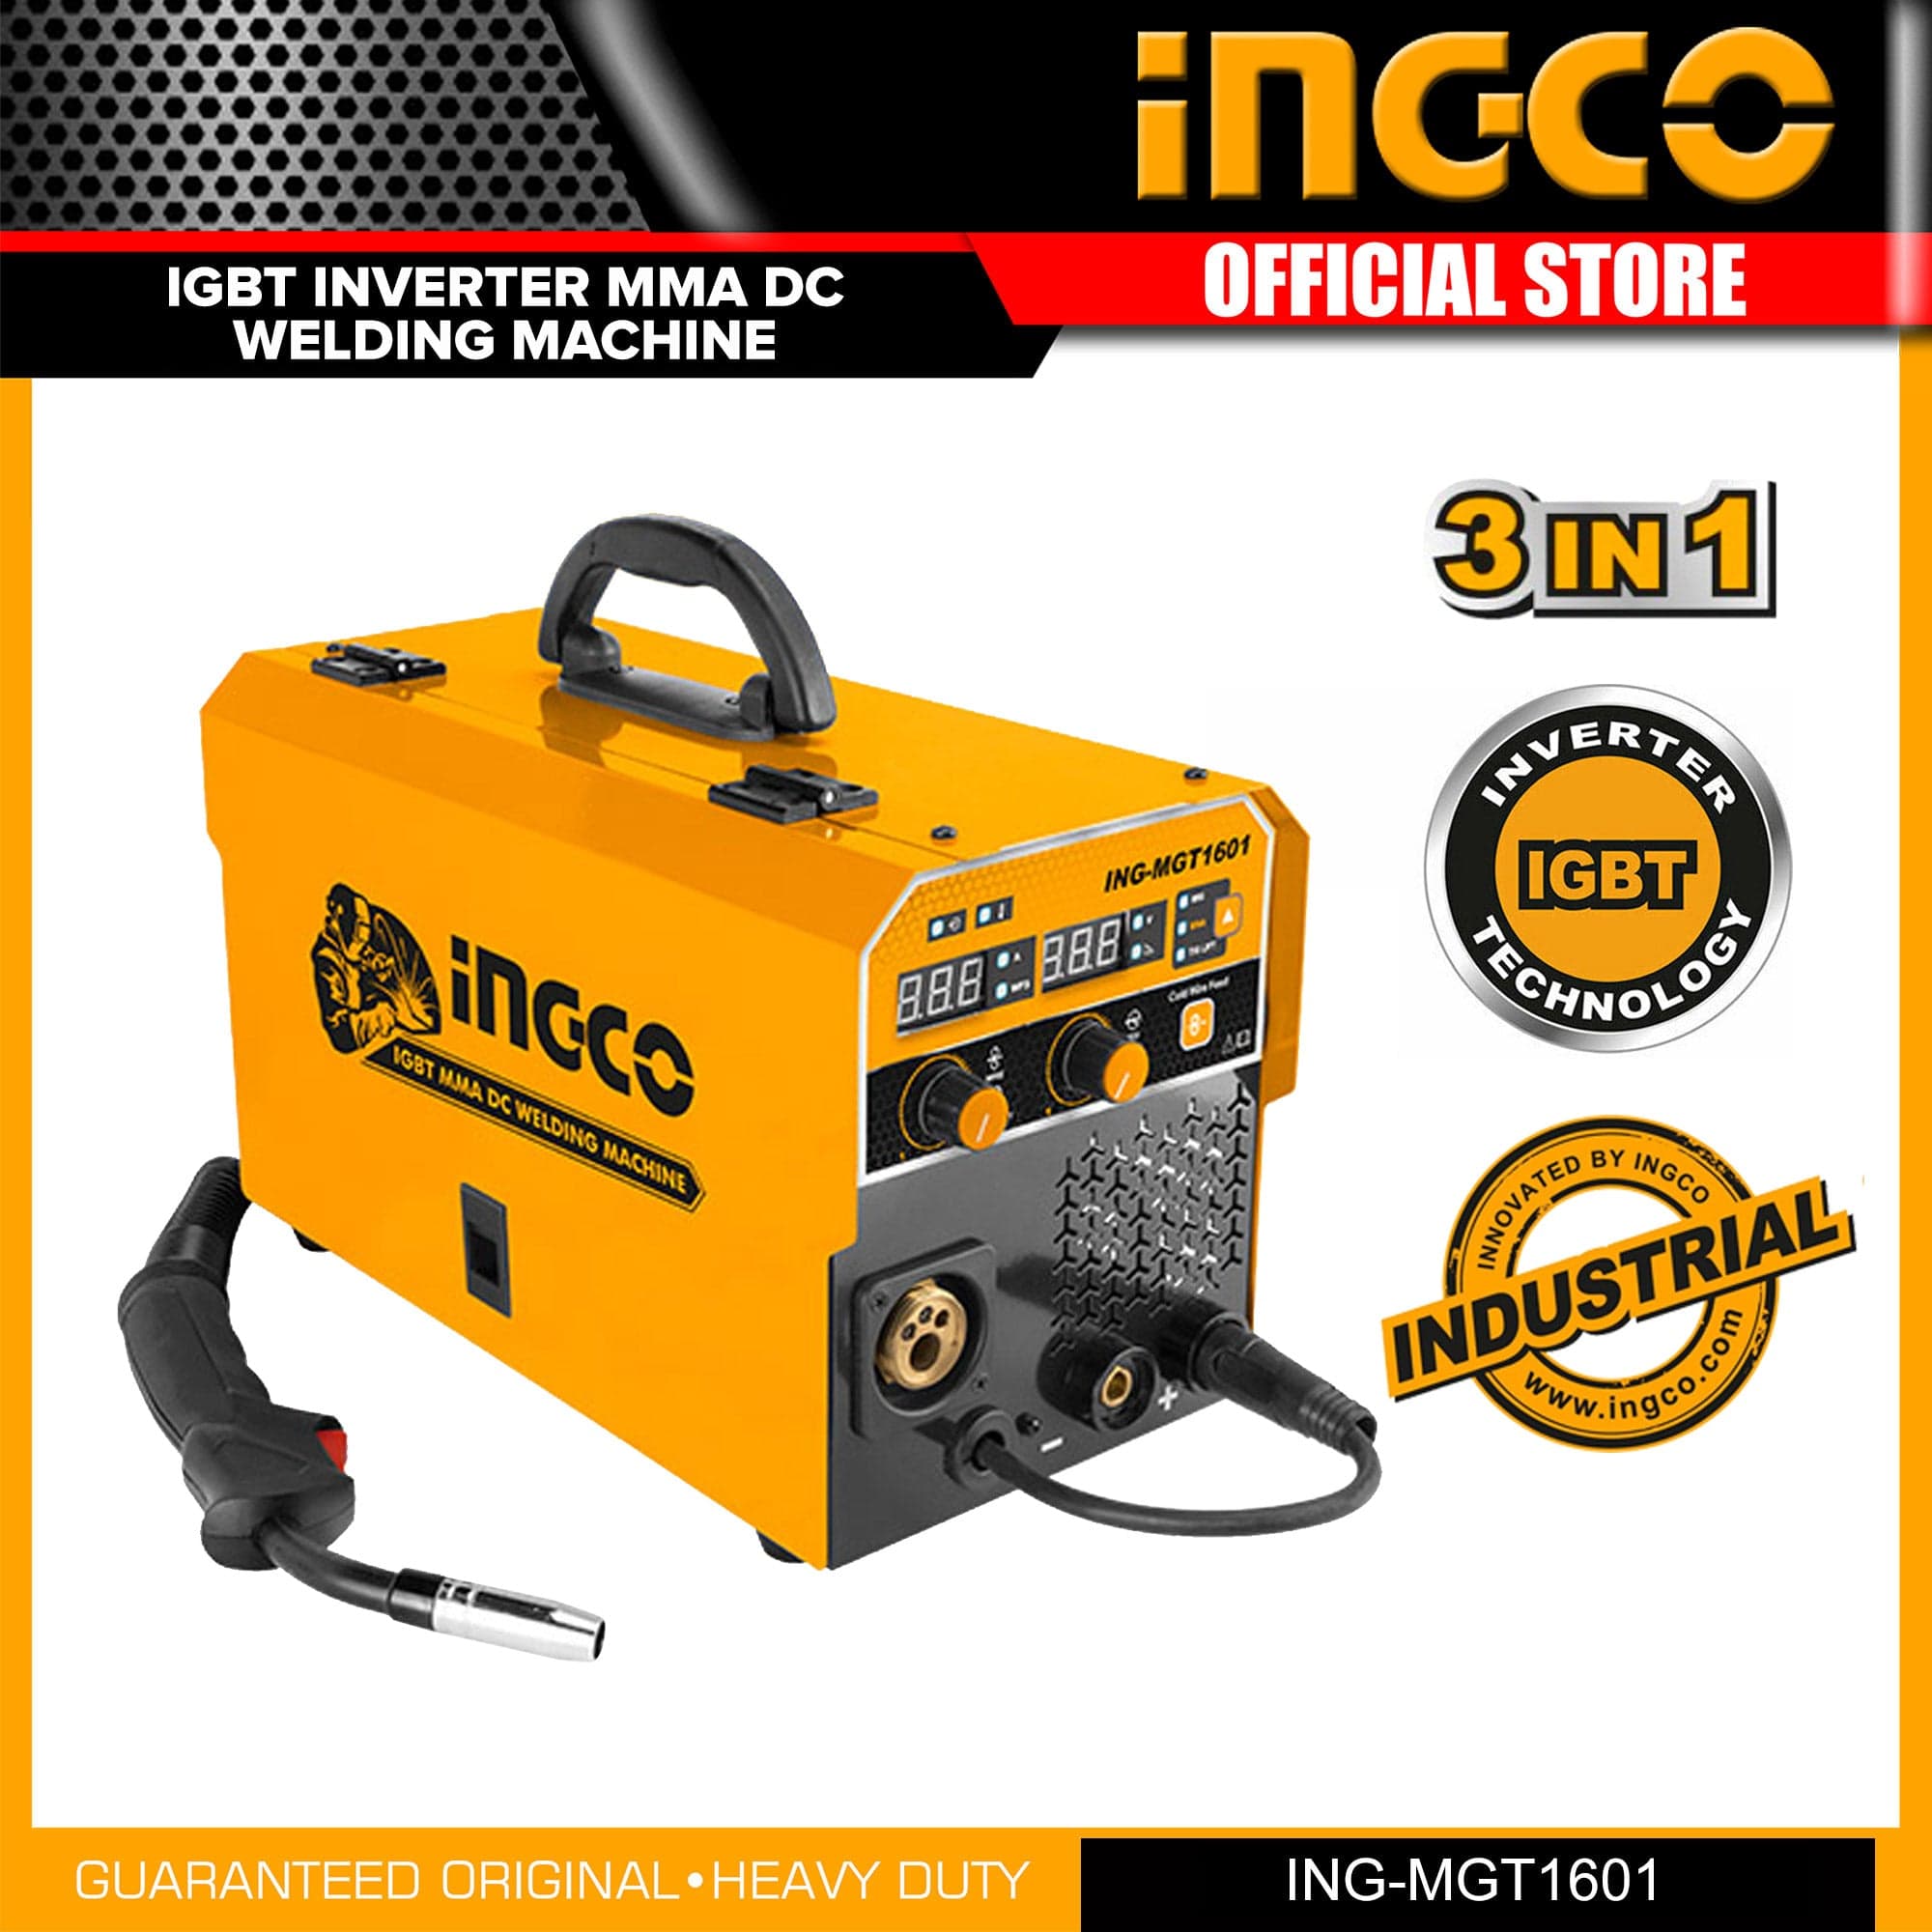 Ingco Inverter MAG/MIG/MMA/TIG Lift Welding Machine 160 AMP - ING-MGT1601 | Shop Online in Accra, Ghana - Supply Master Welding Machine & Accessories Buy Tools hardware Building materials